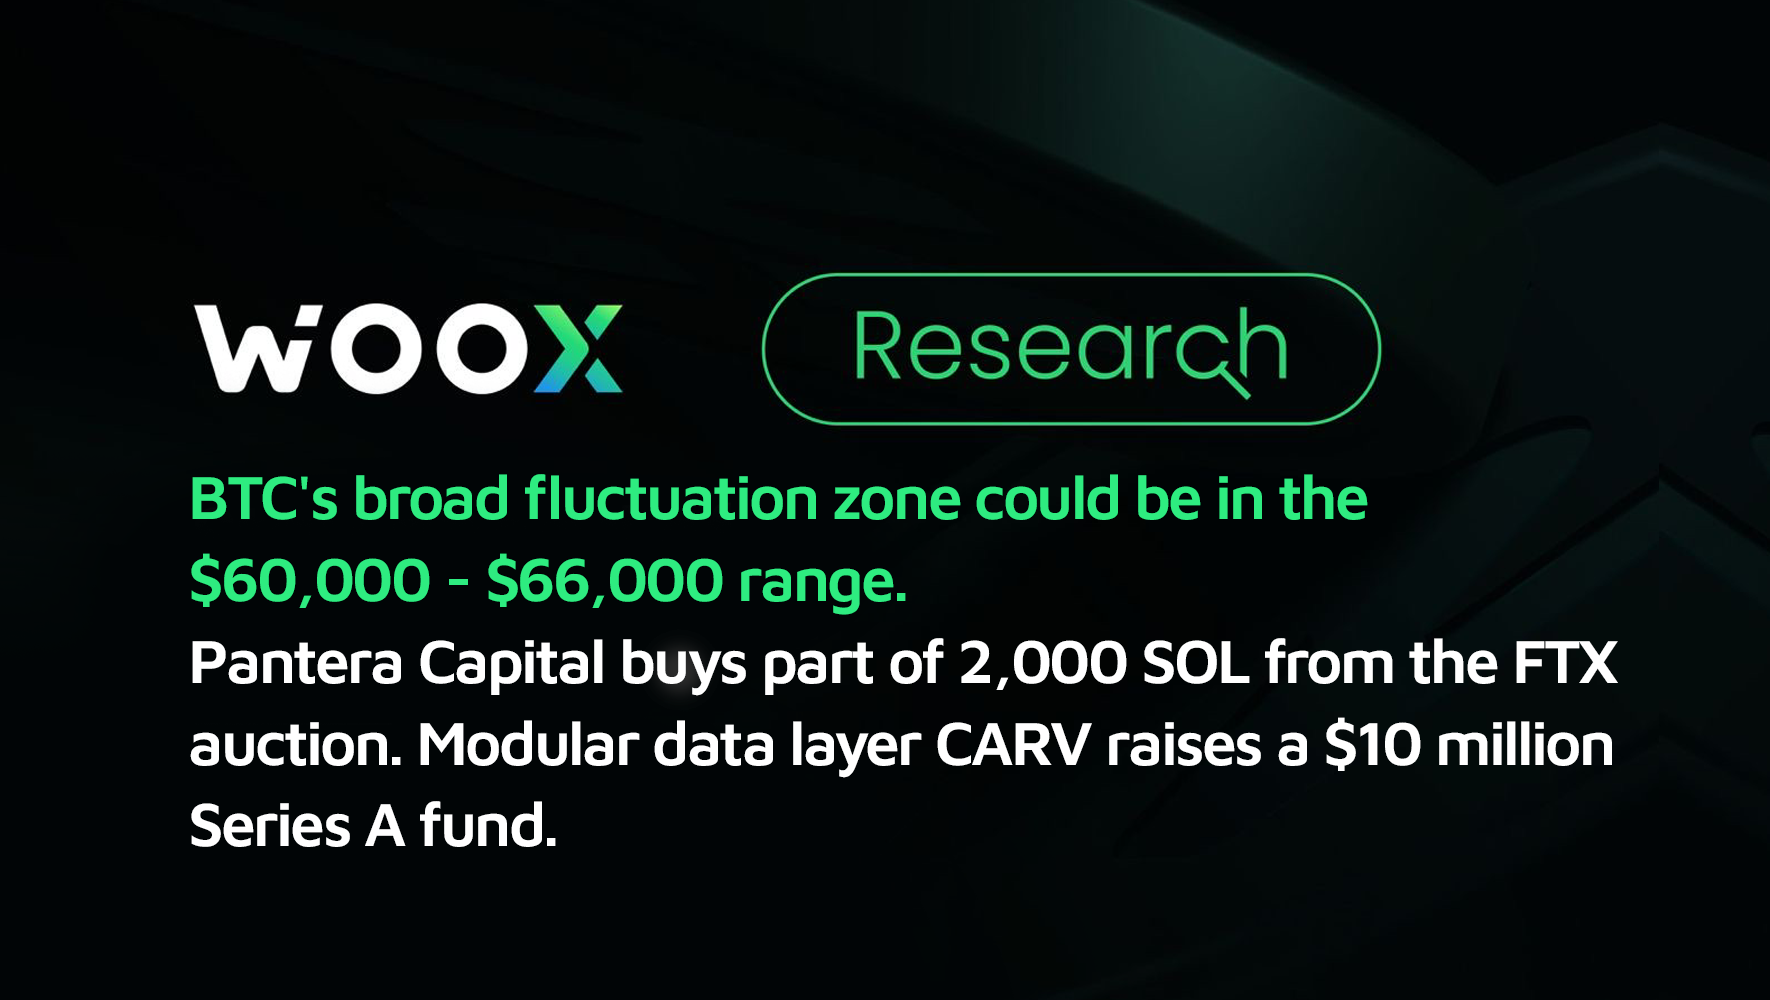 BTC's broad fluctuation zone could be in the $60,000 - $66,000 range